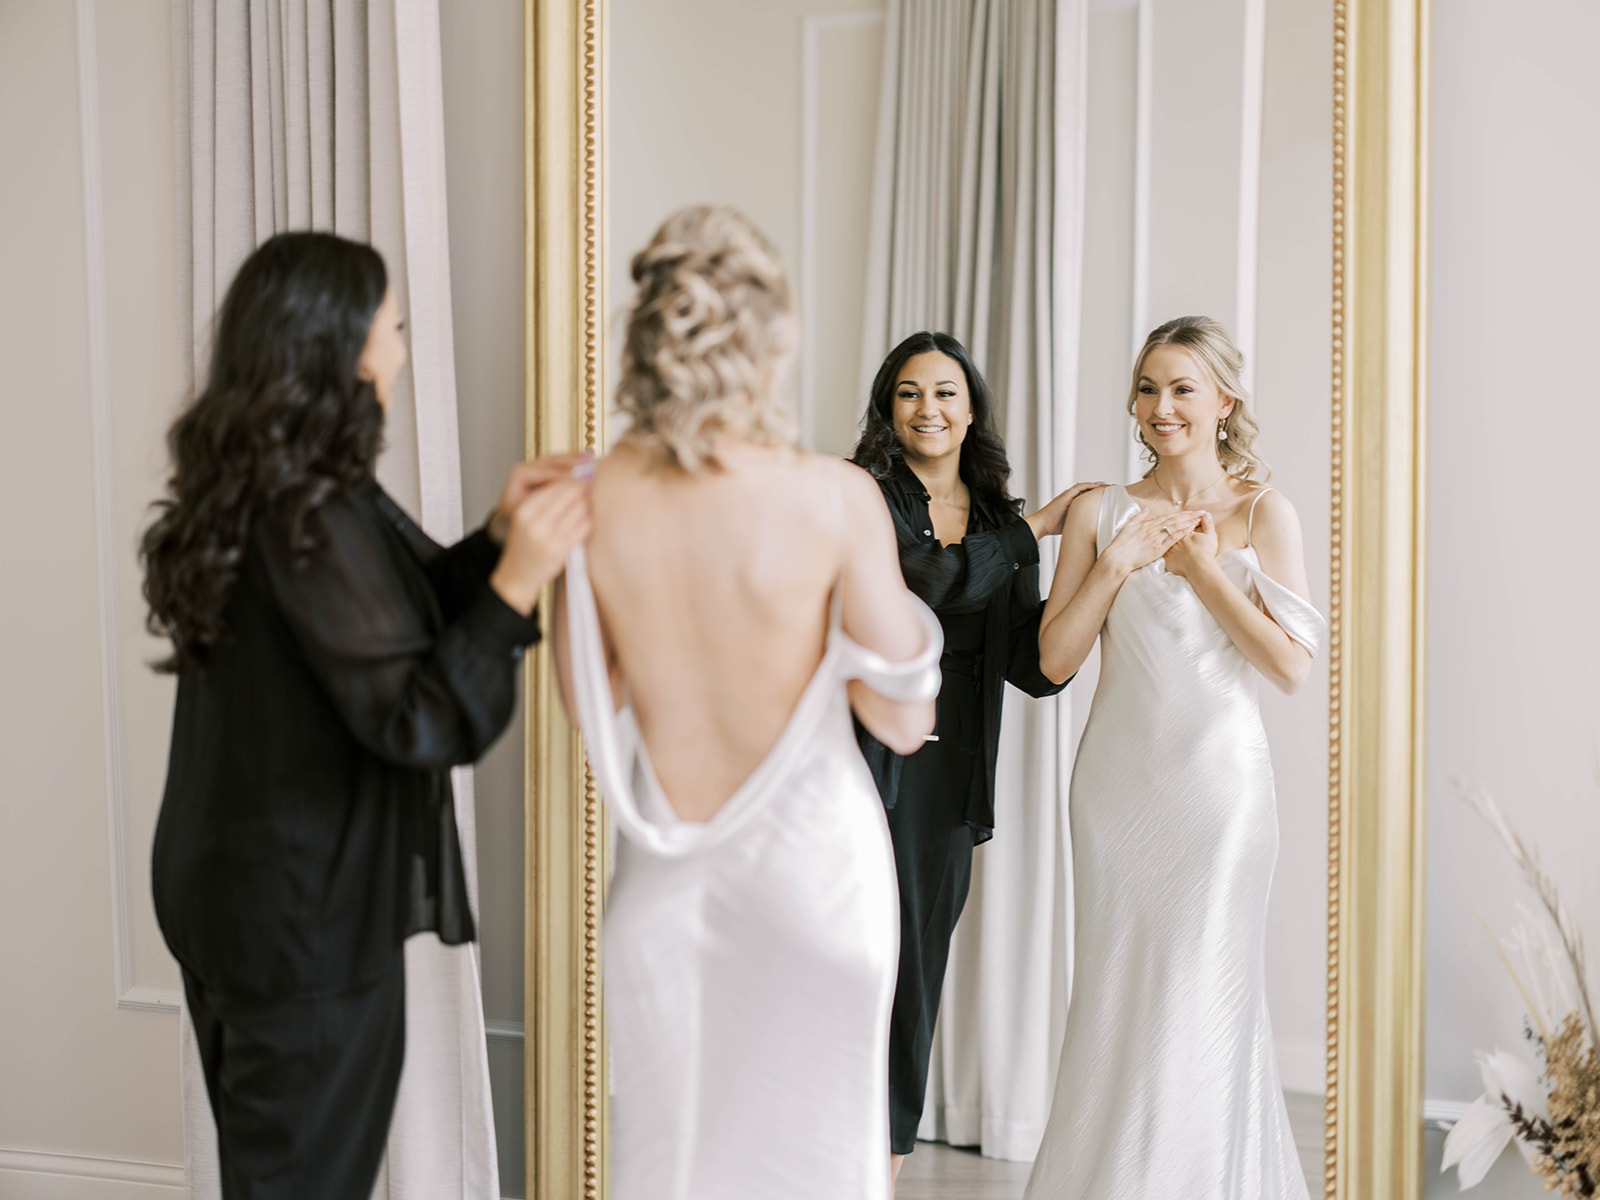 How to find the perfect wedding dress Calgary Wedding Photographers, blush and raven, nicole sarah, wedding dress shopping, bridal gown tips, wedding dress tips